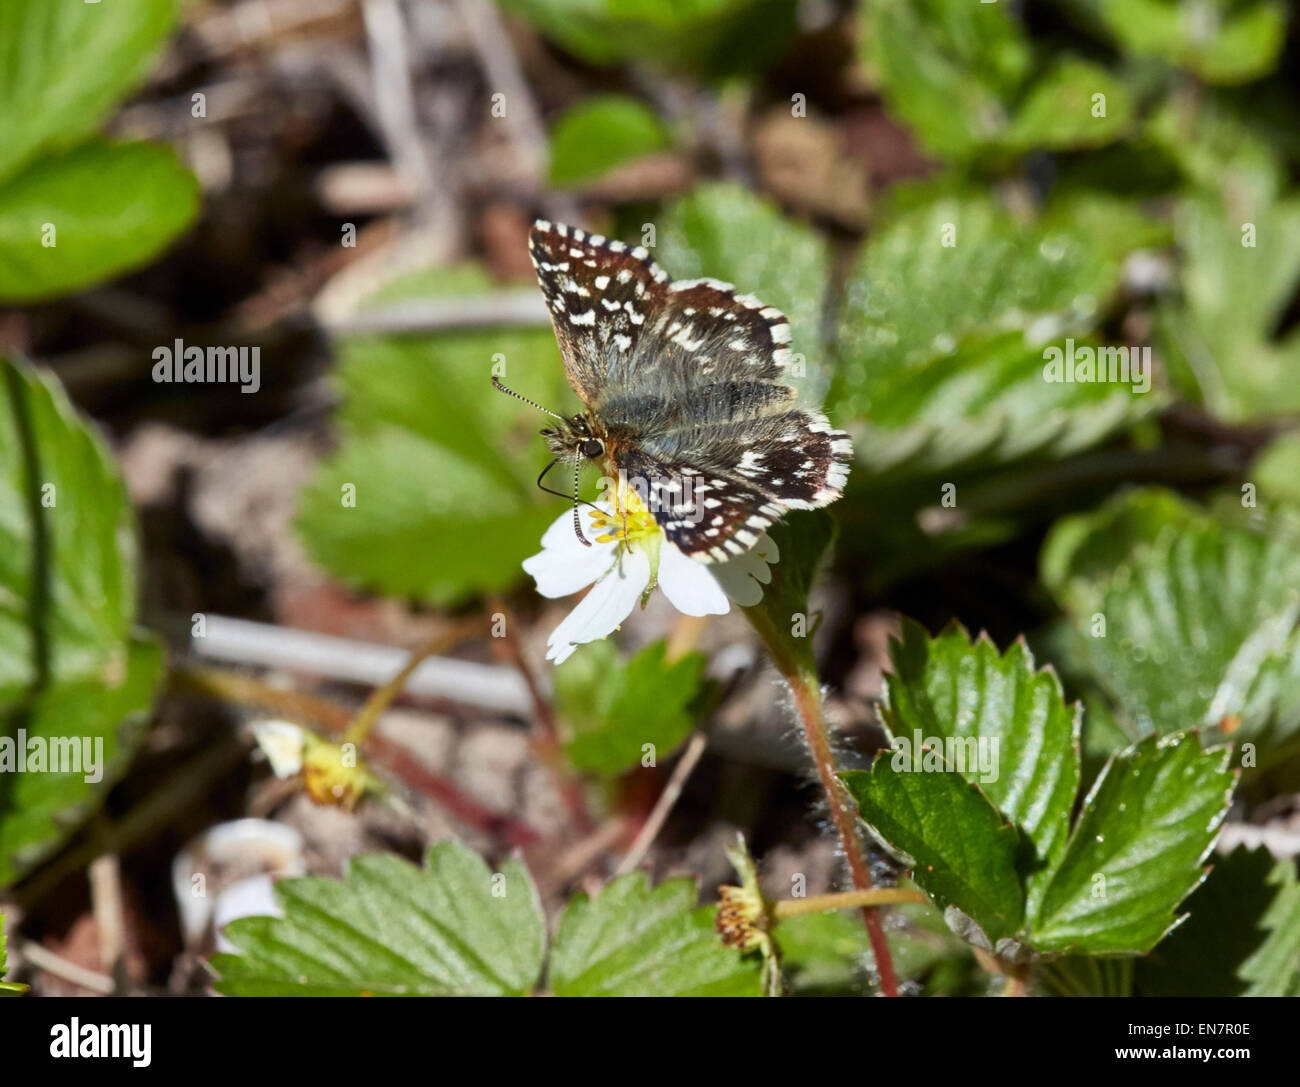 Grizzled Skipper butterfly nectaring on wild strawberry. Sheepleas, East Horsley, Surrey, England. Stock Photo